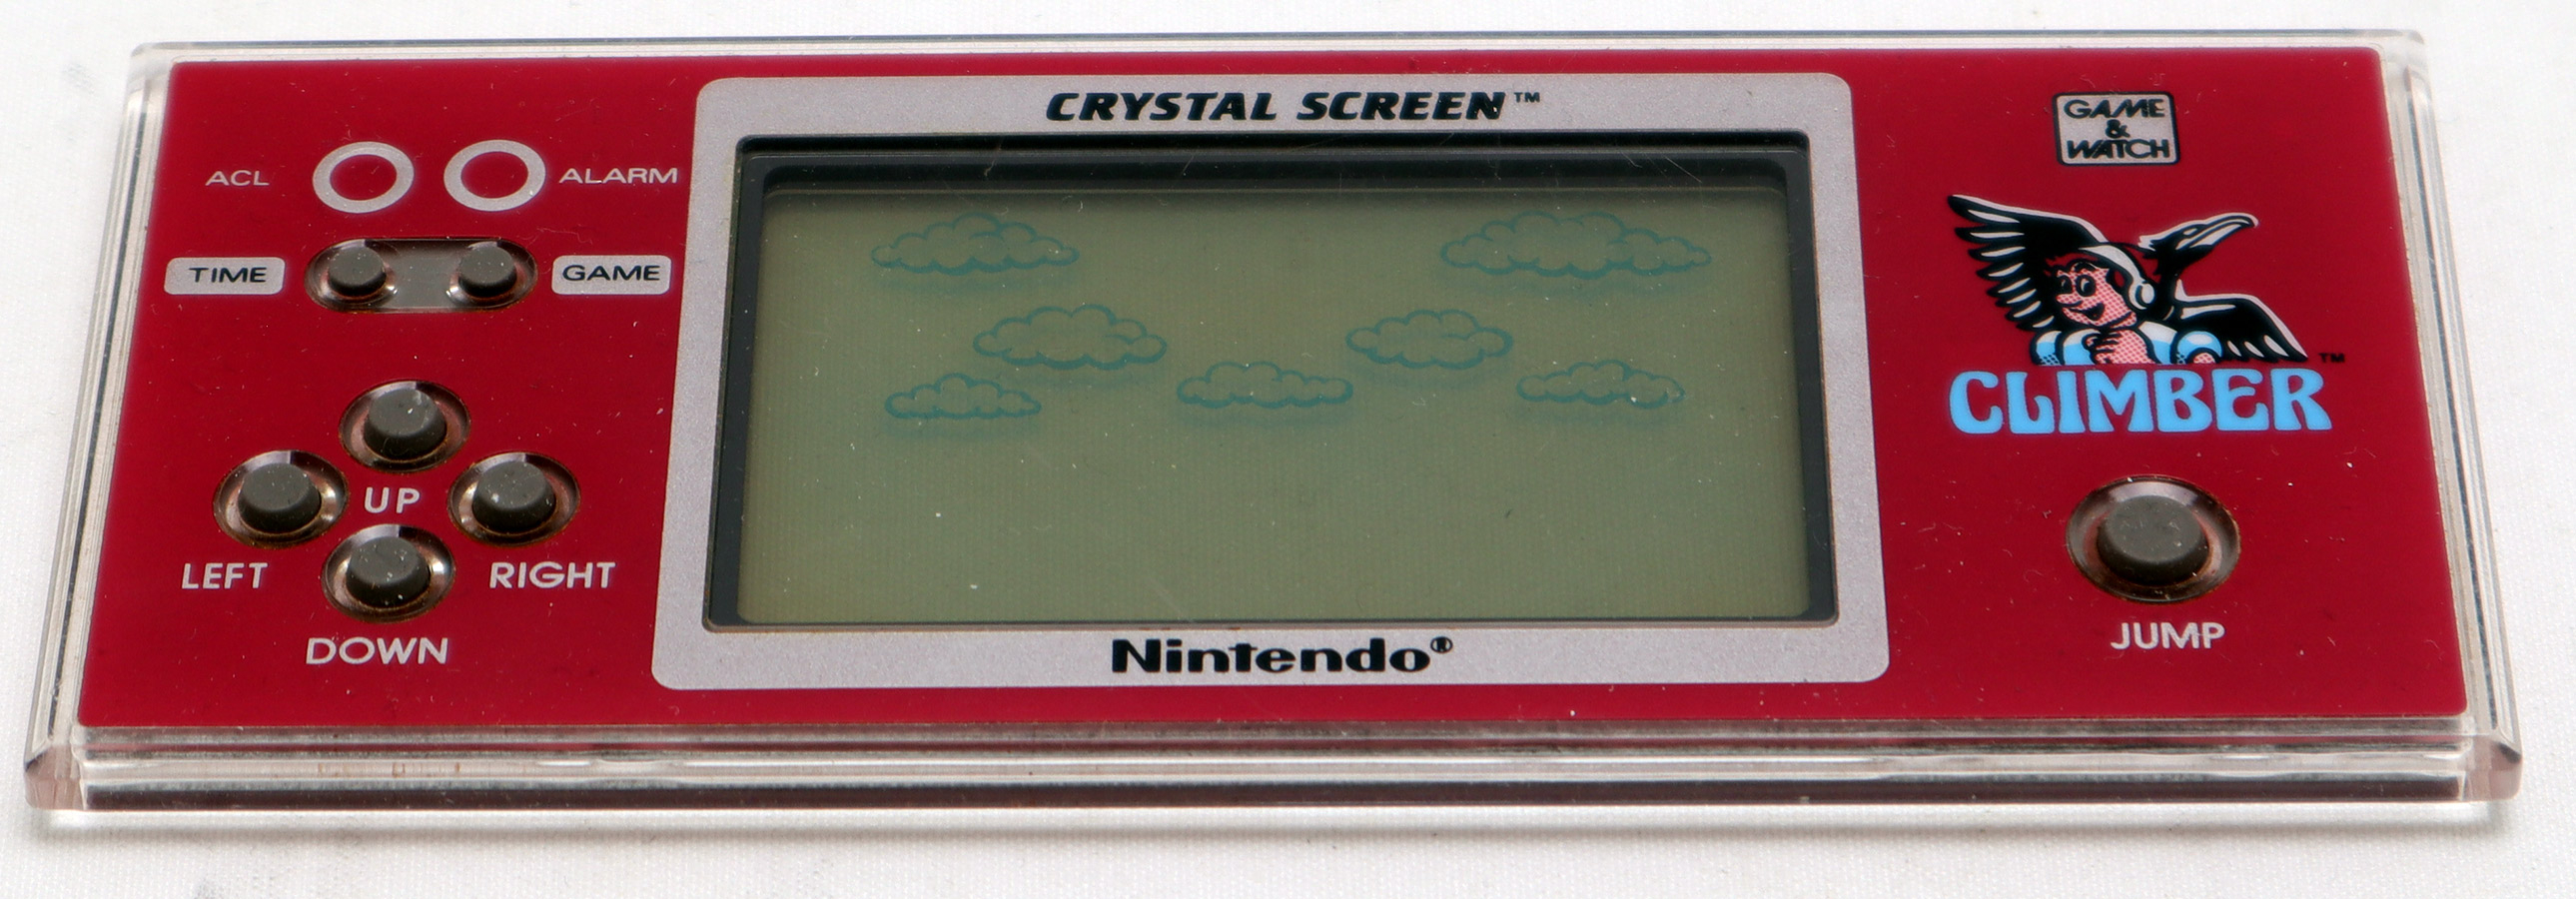 Game & Watch Climber Game & Watch (Crystal Screen) - Spel & Sånt: The video with the happiest customers